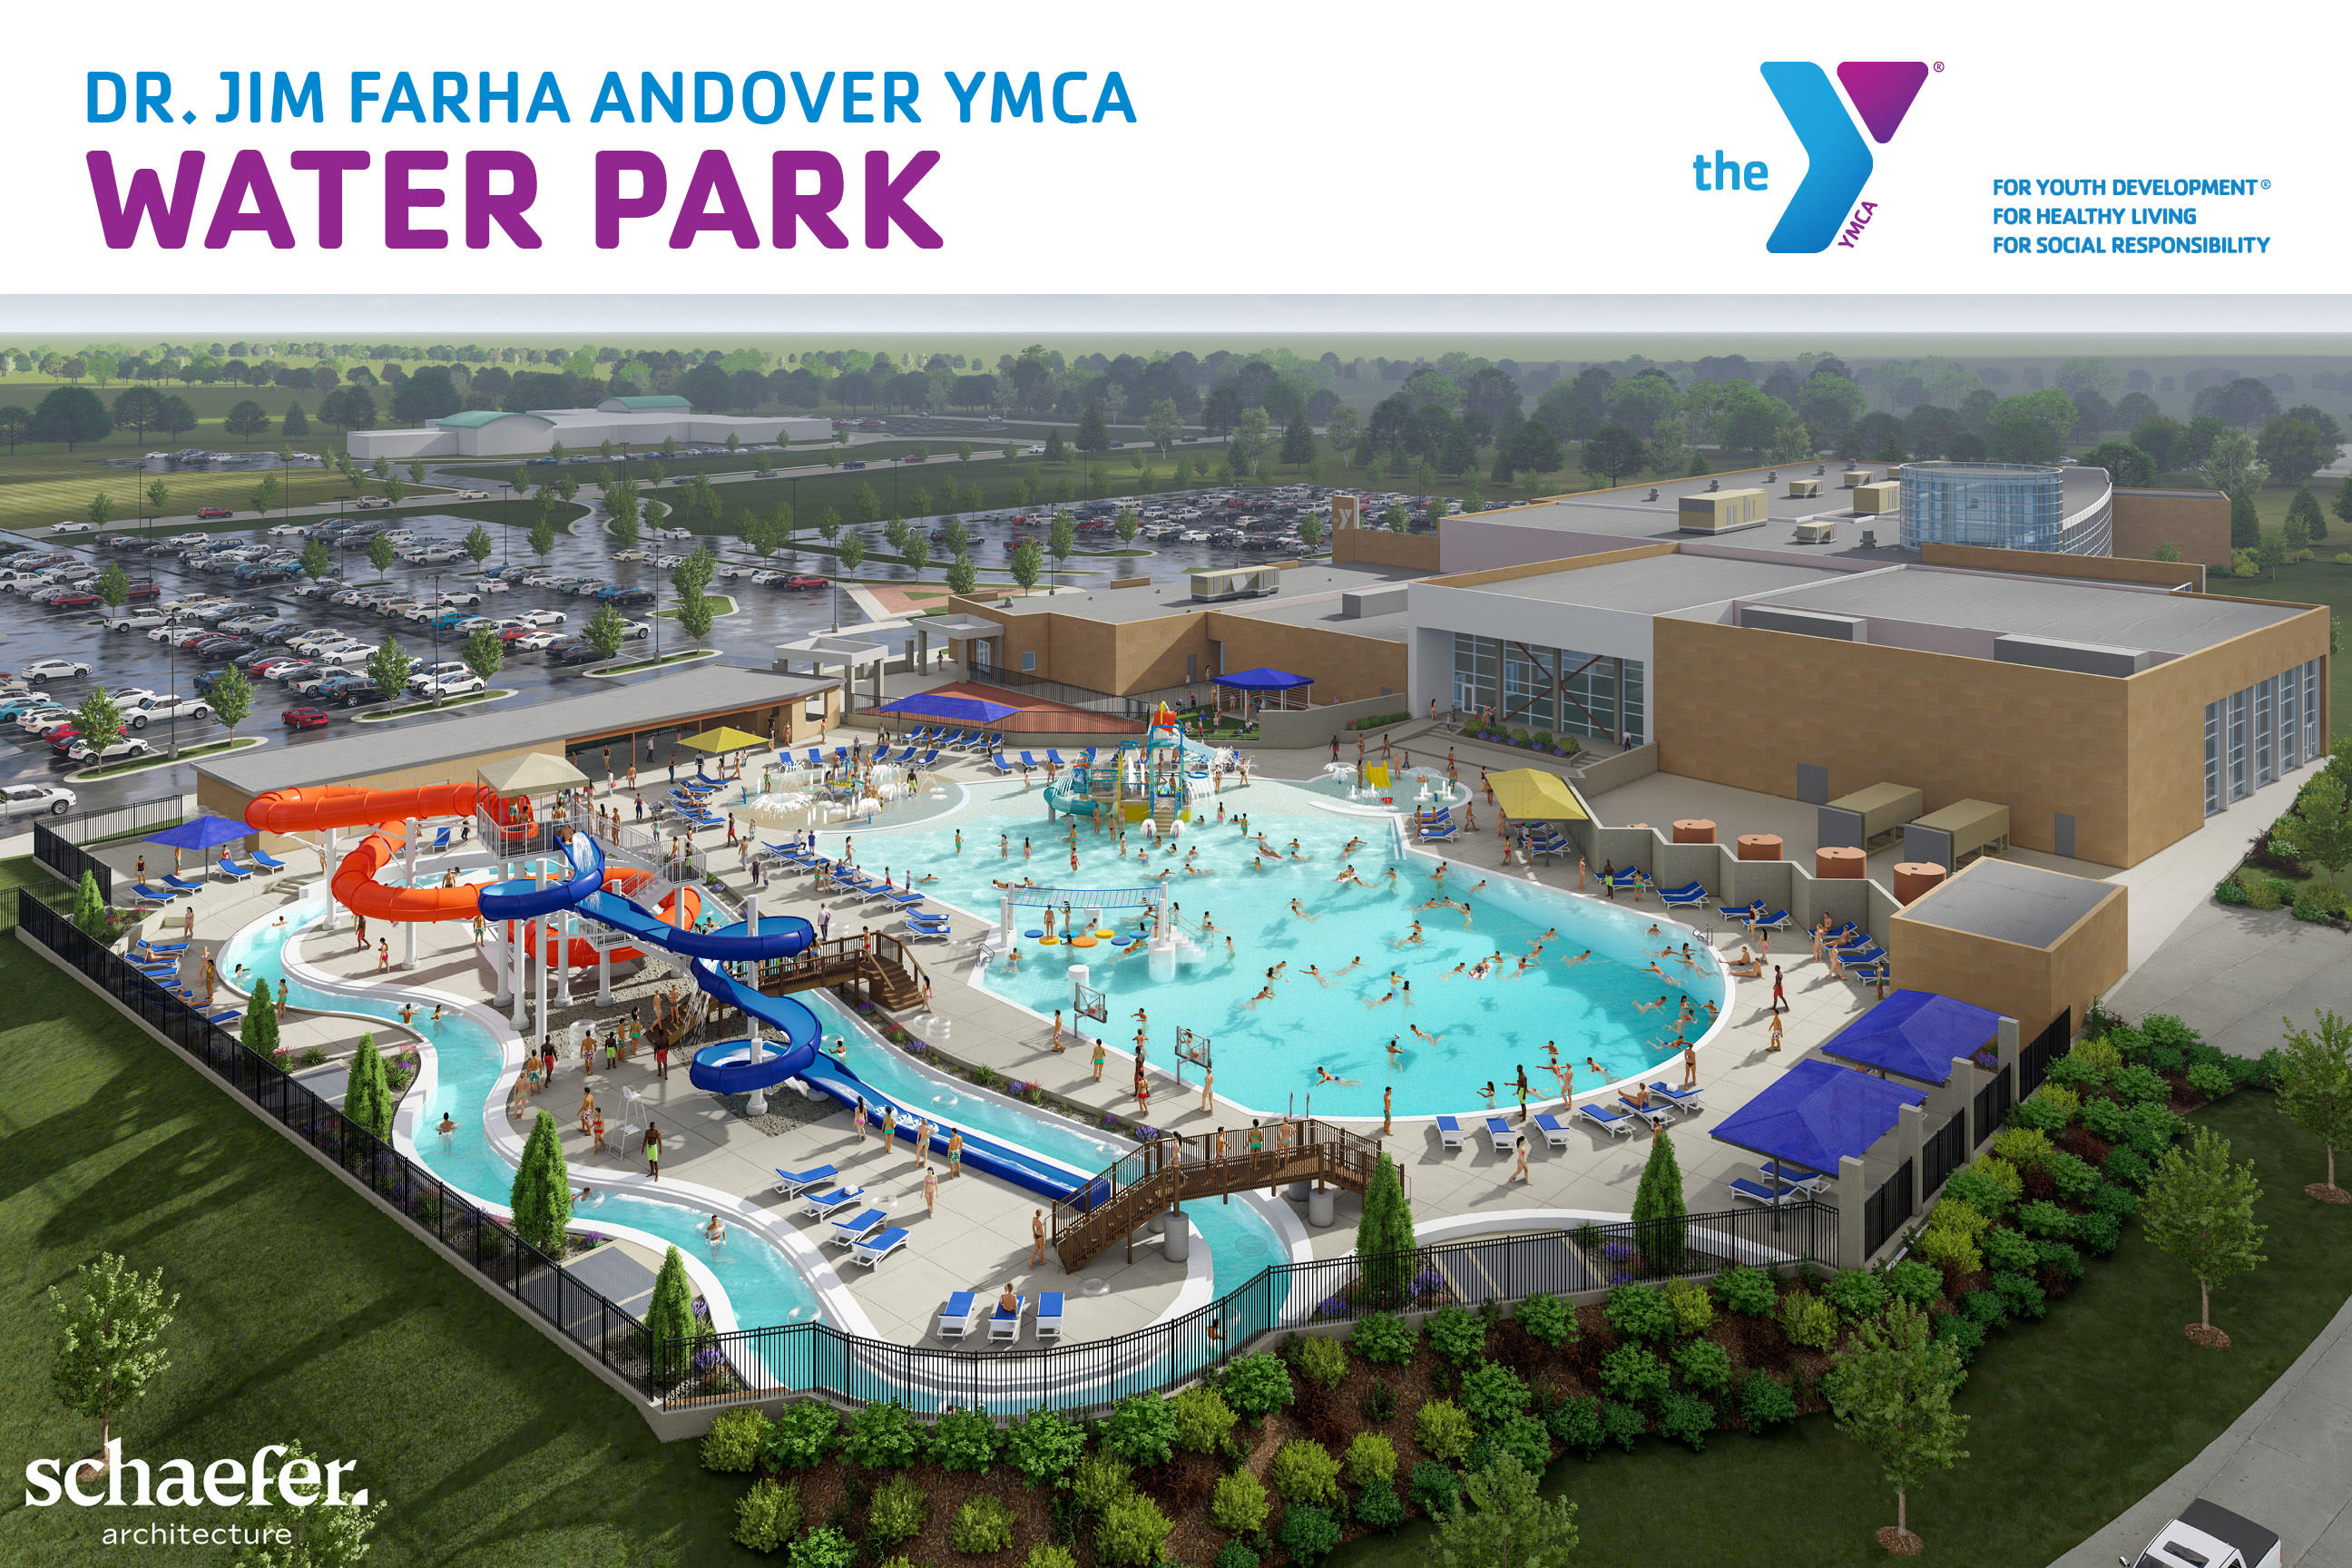 Andover YMCA water park to reopen in May